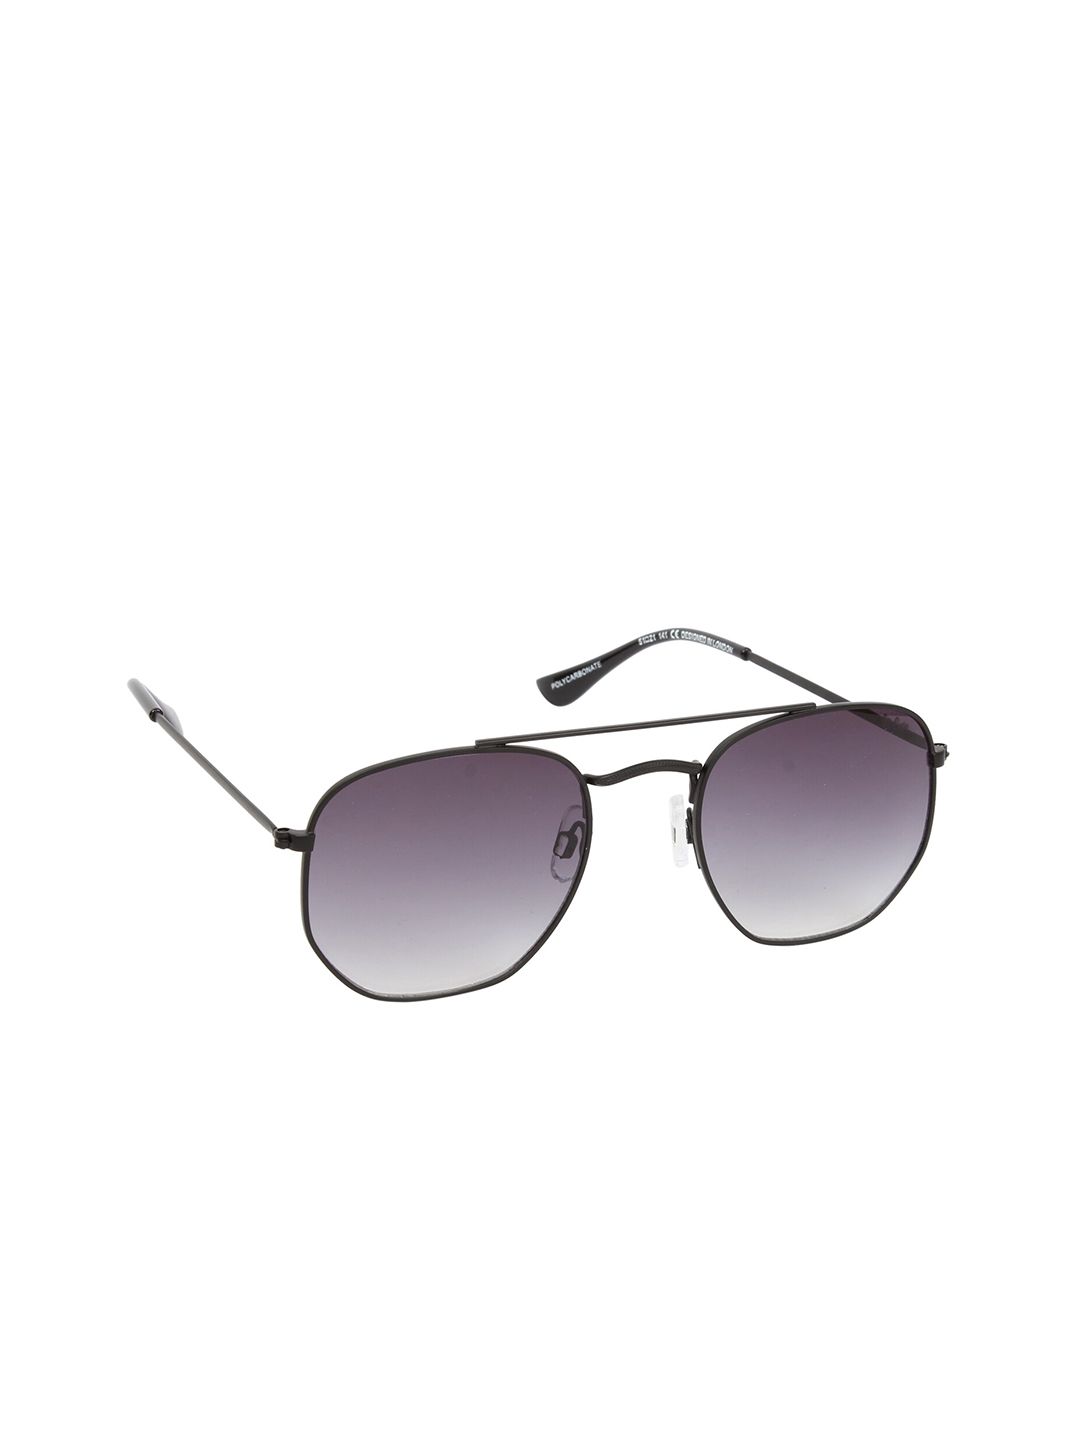 Lee Cooper Unisex Grey Lens & Black Other Sunglasses with UV Protected Lens Price in India